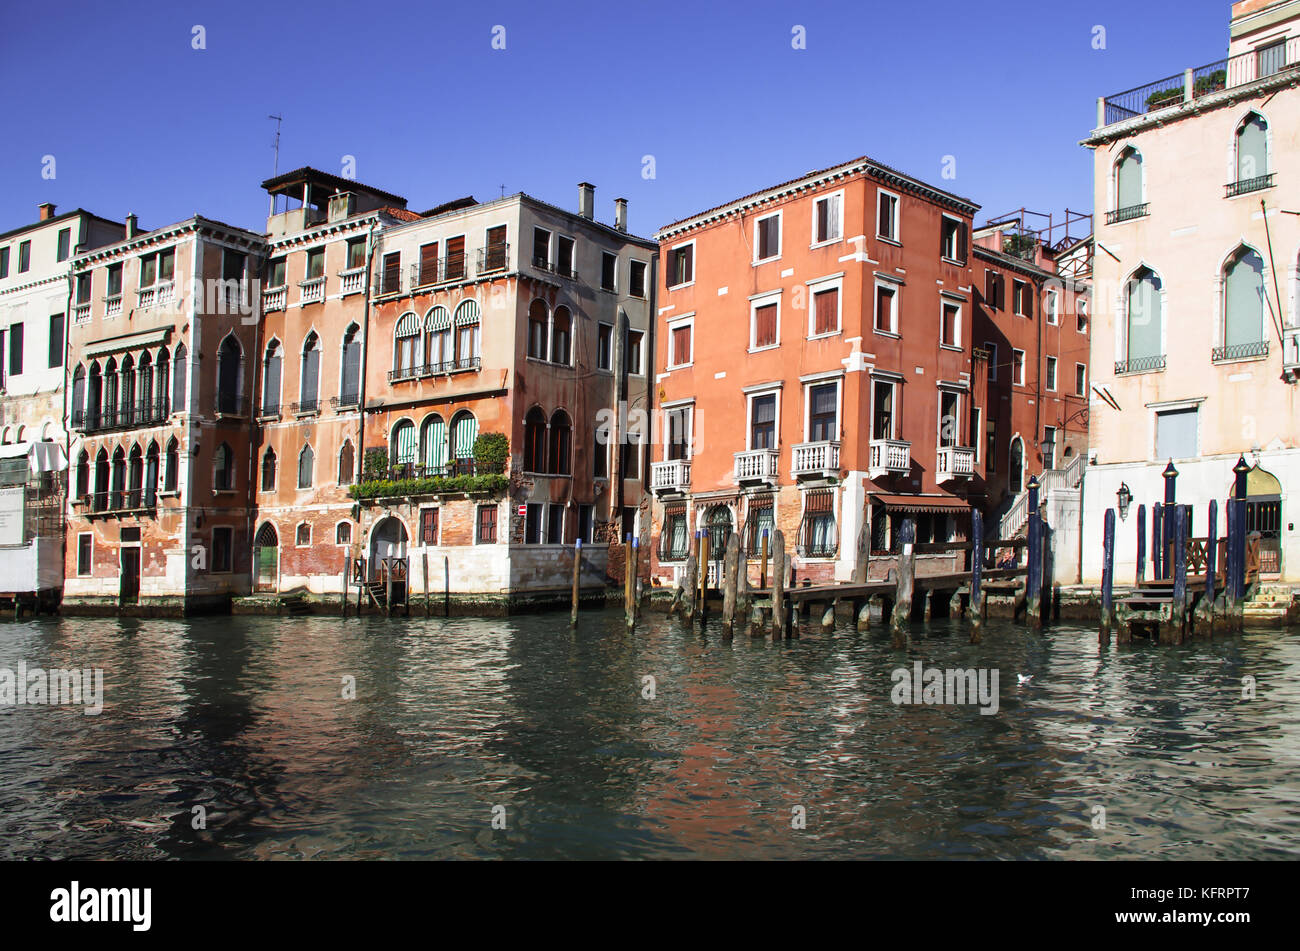 elegant mansions overlooking the large canal, cheer for centuries with their vibrant and bright colors, the Venetian atmosphere Stock Photo